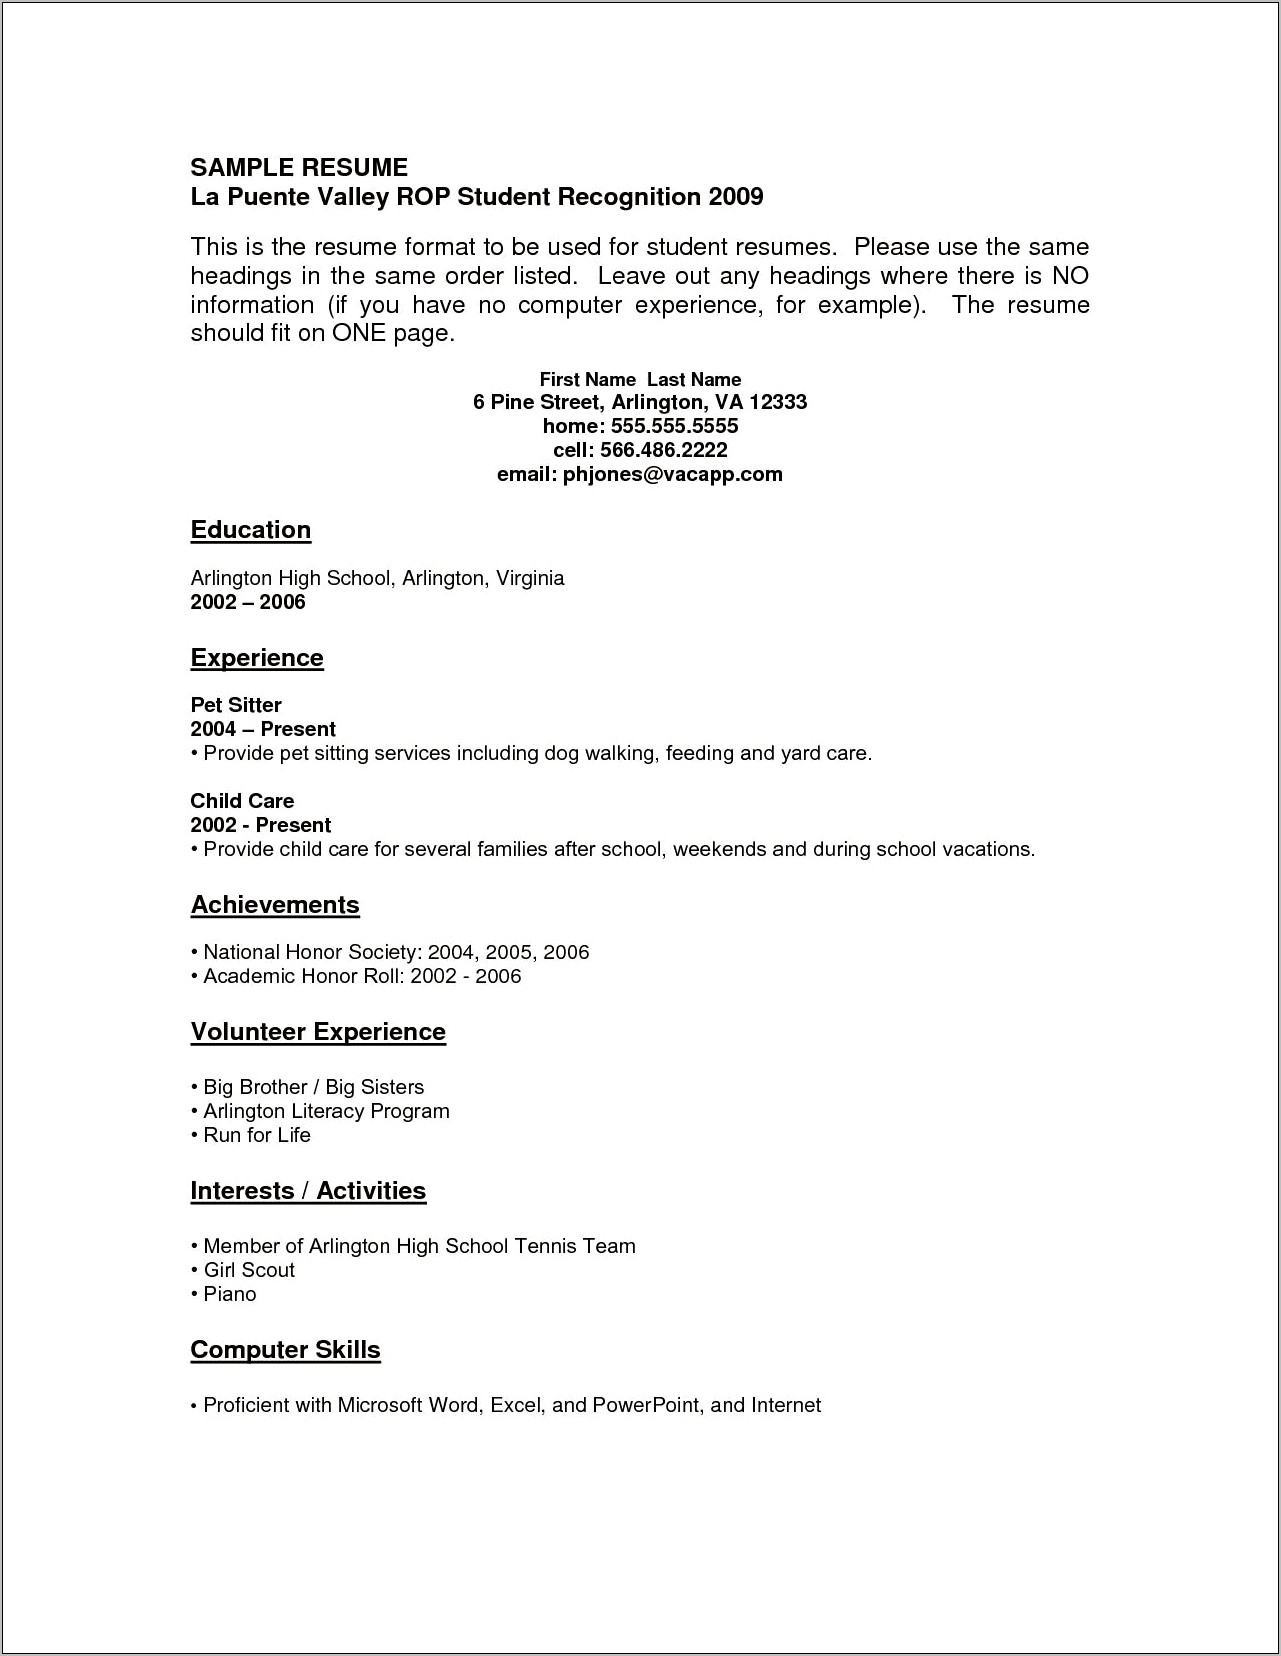 Resume Samples Without Job Experience